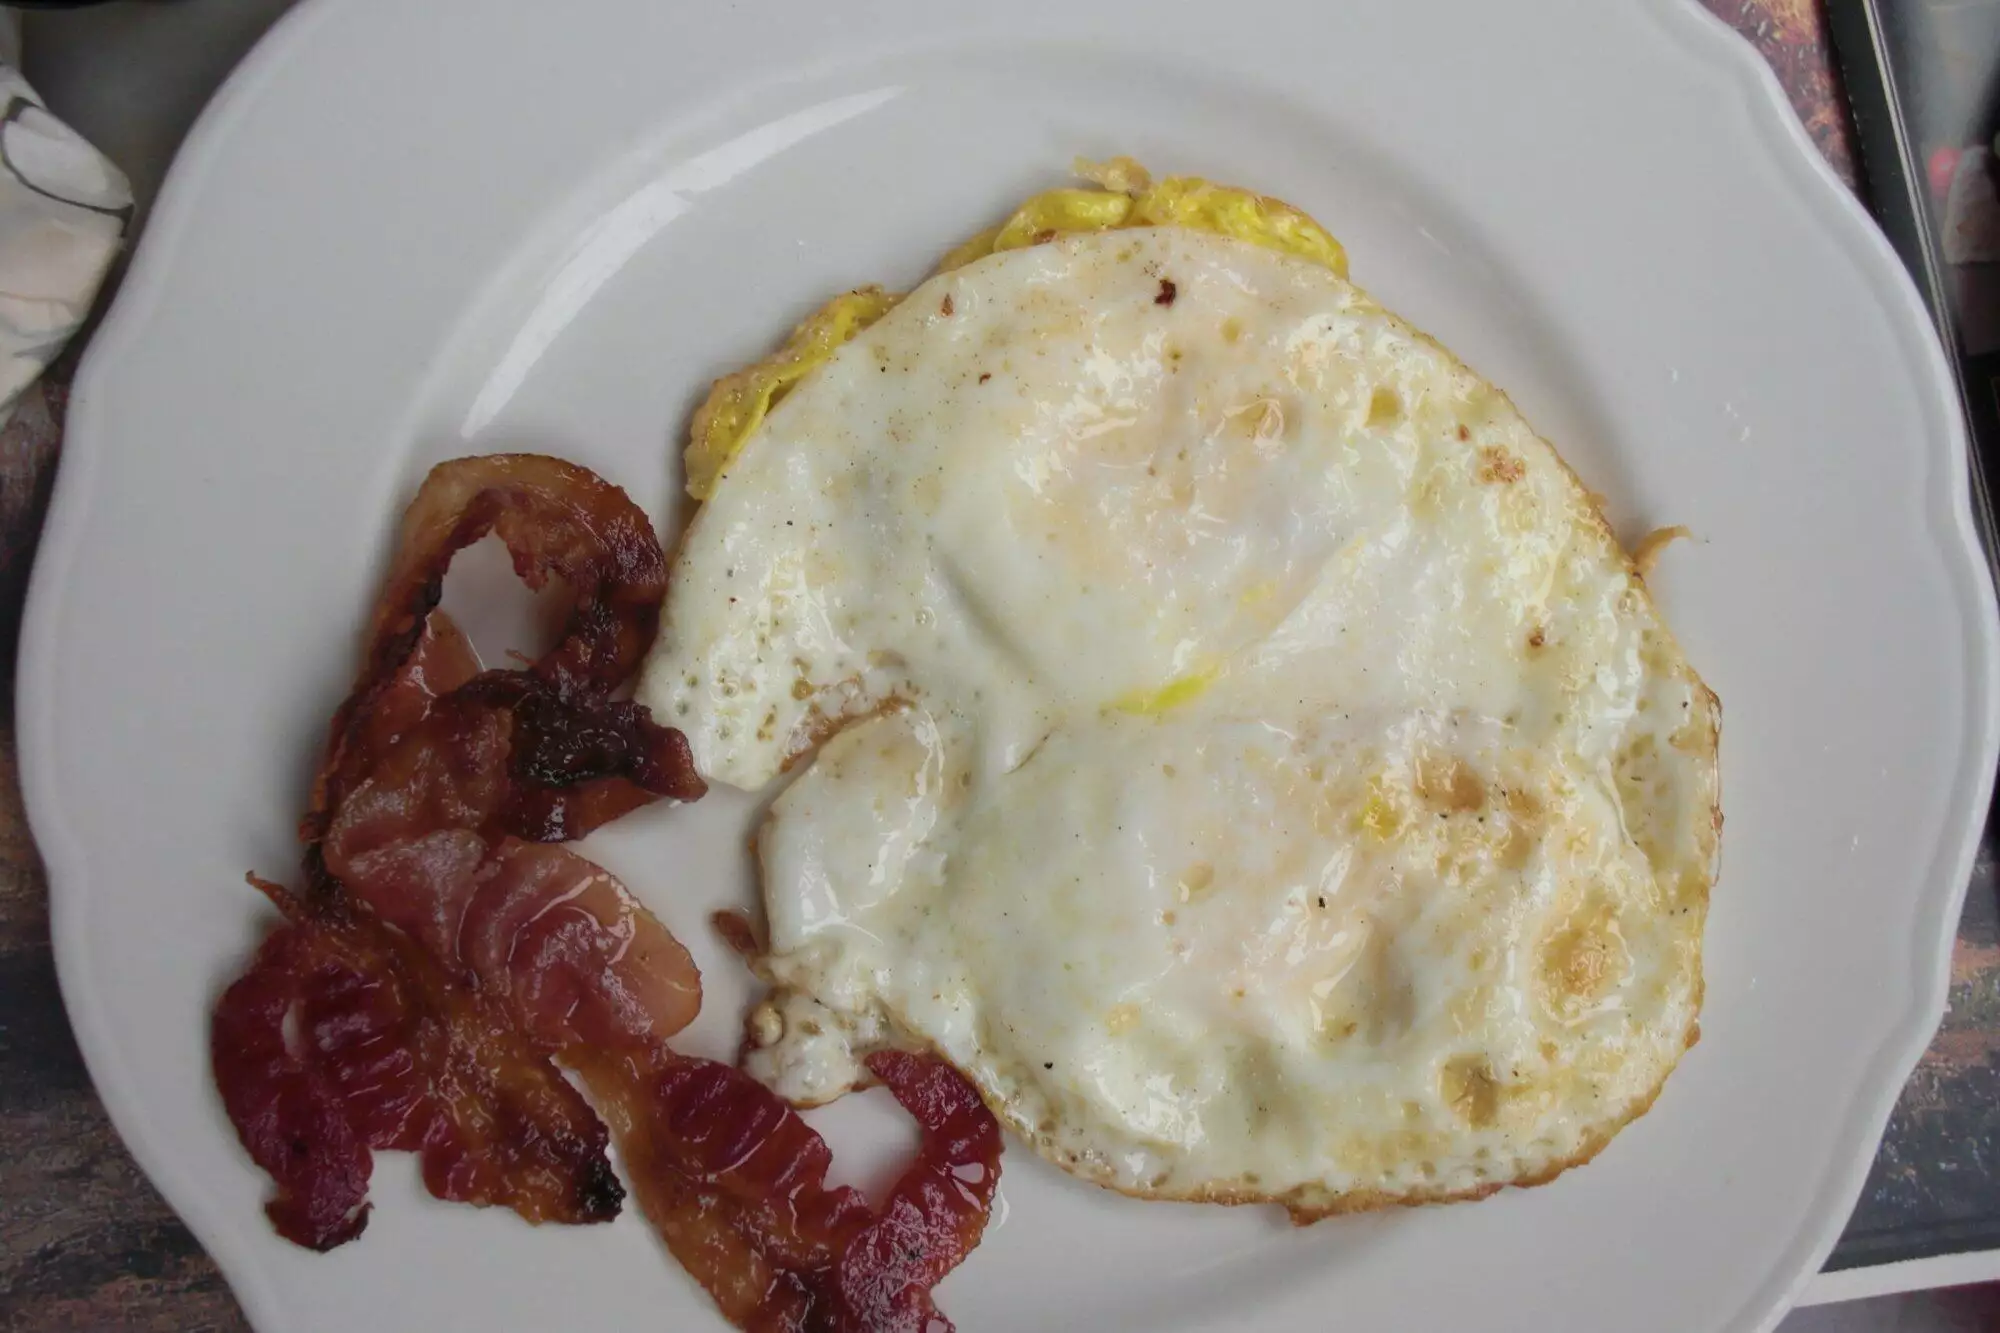 eegs and bacon